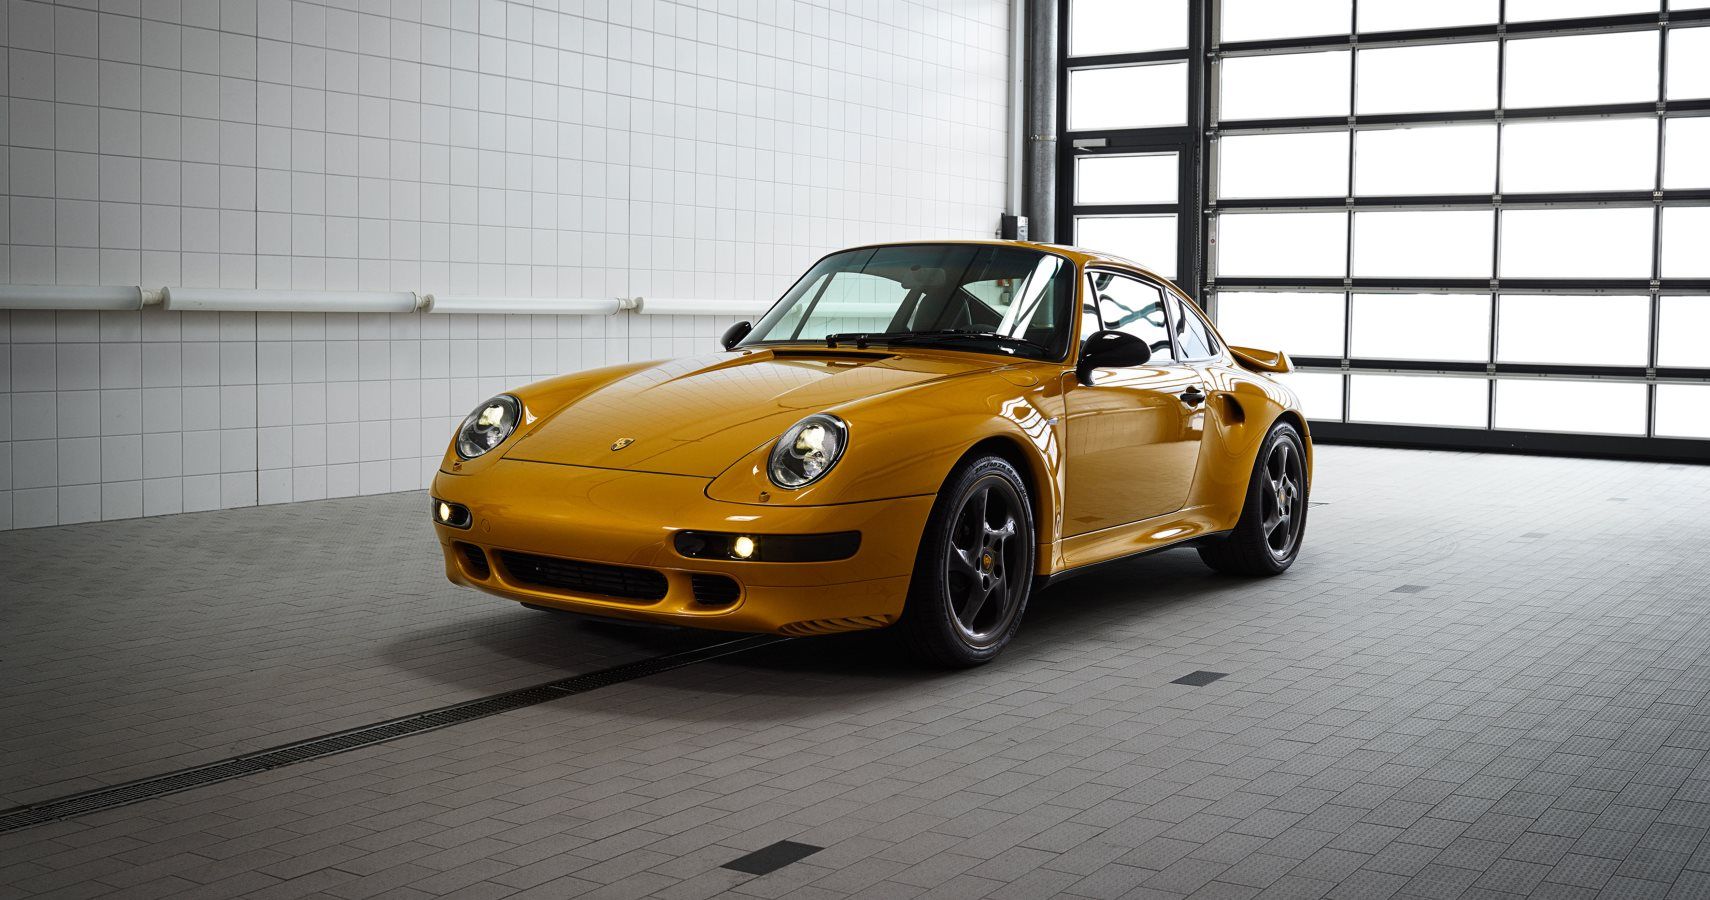 Porsche 993 Turbo S “Project Gold” Sells For Over $3 Million